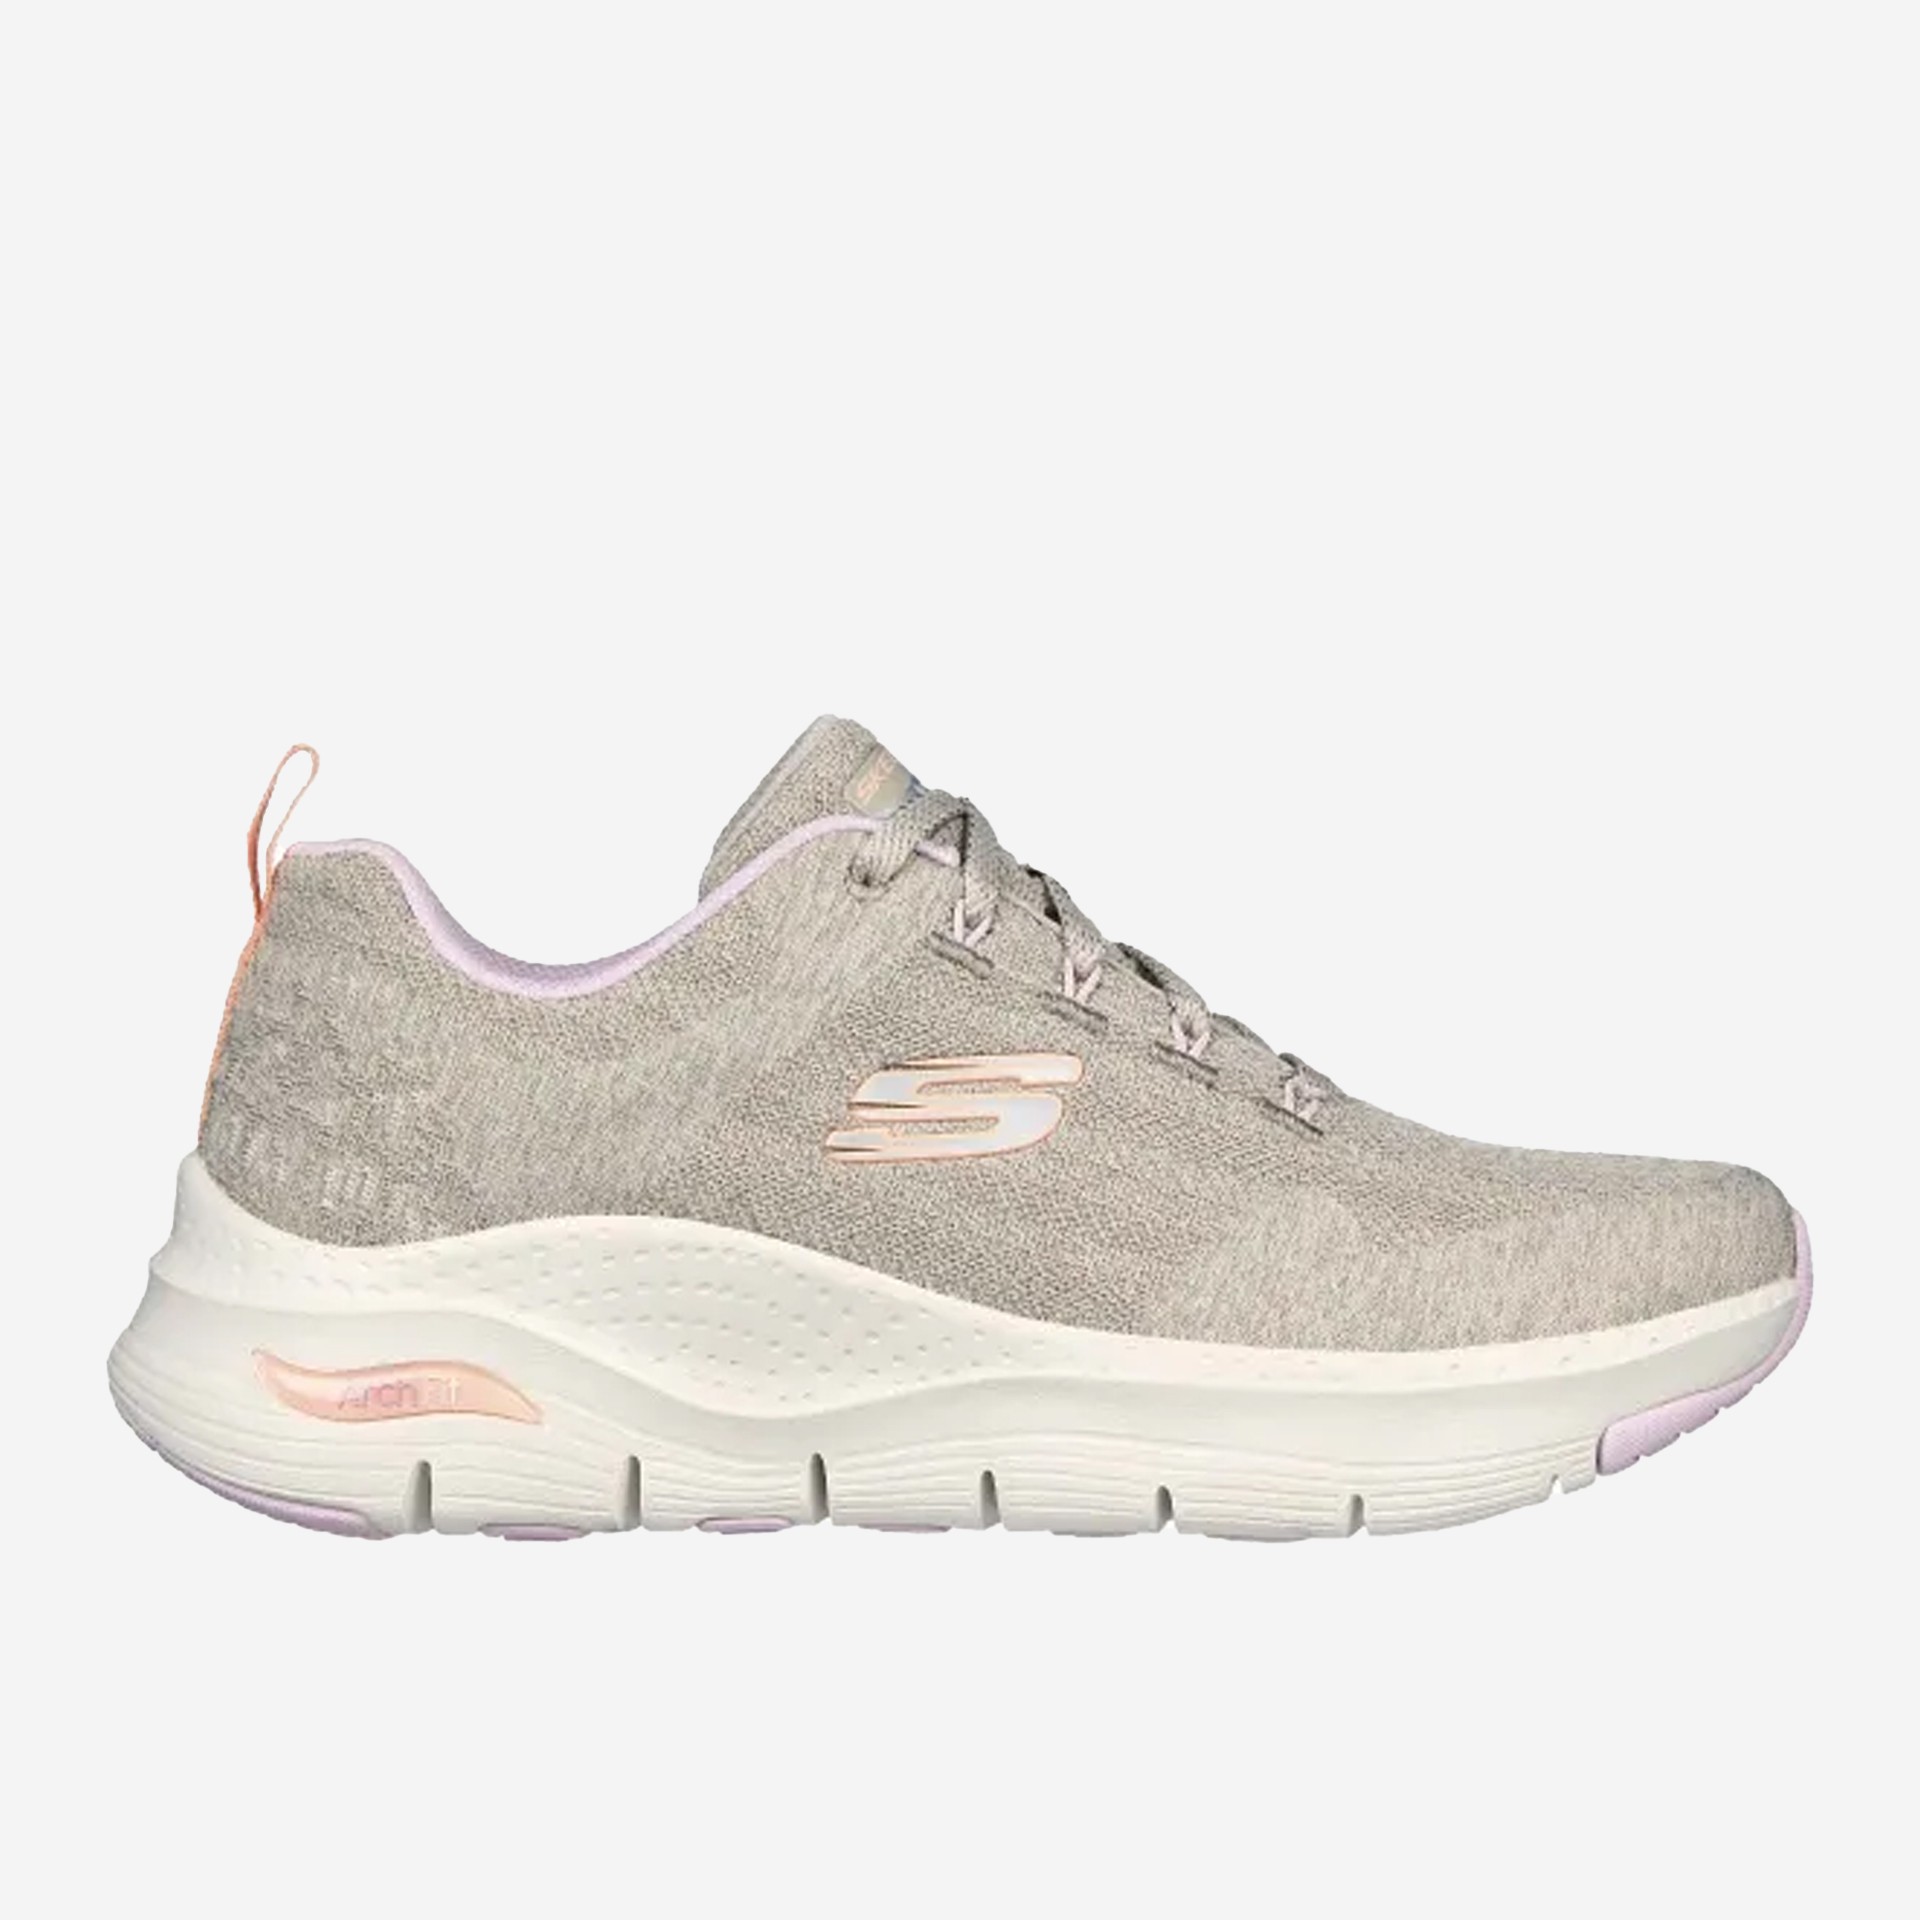 SKECHERS ARCH FIT COMFY WAVE TAUPE/MULTI